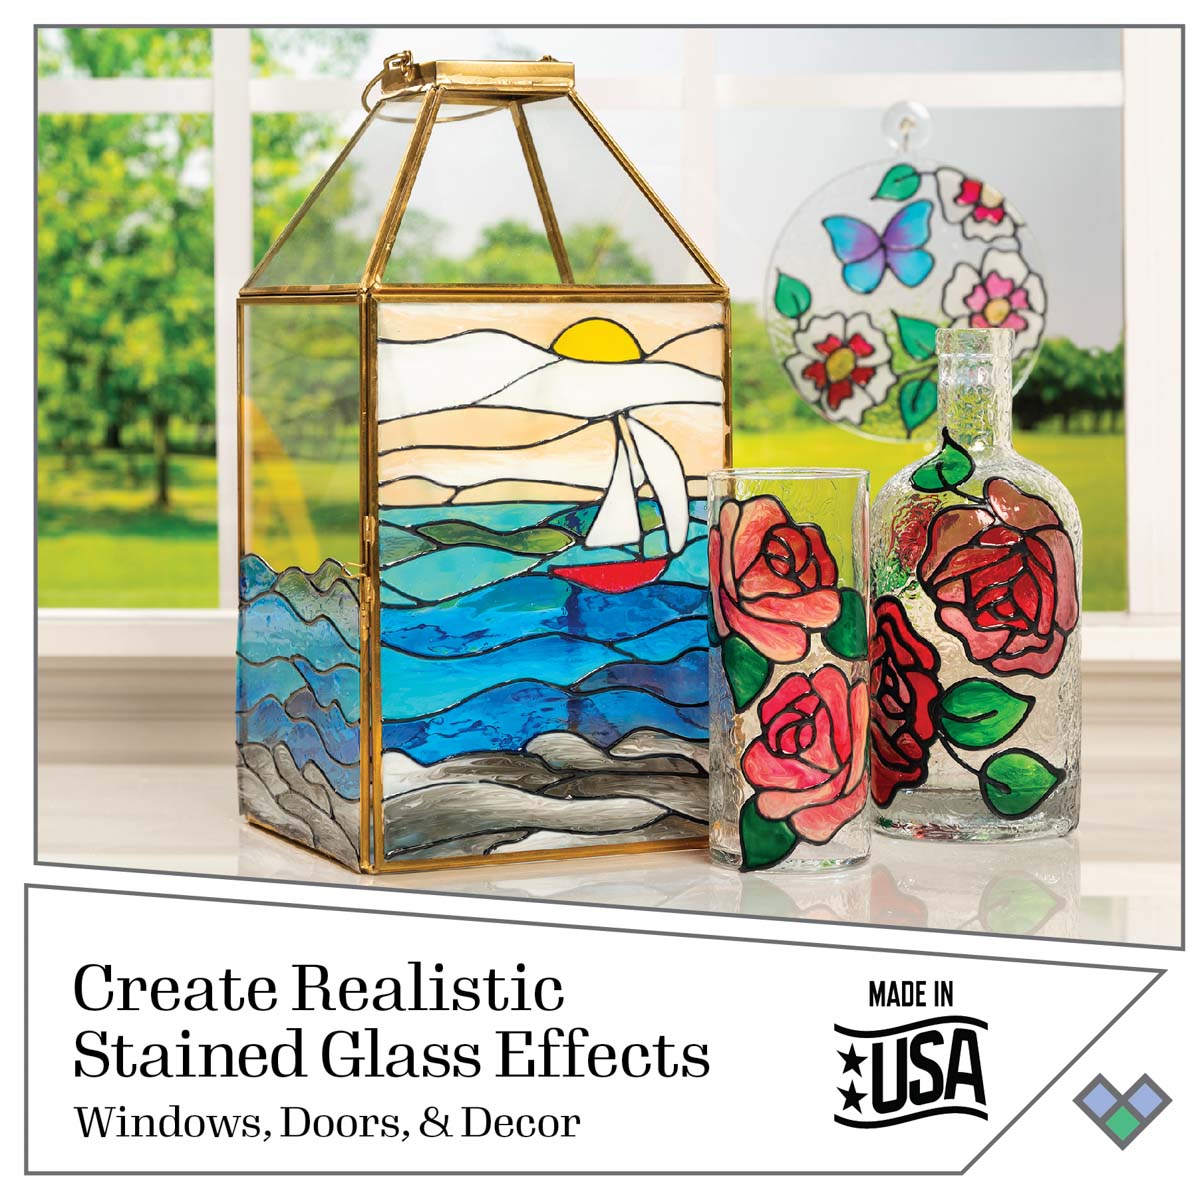 Plaid Crafts - Gallery Glass Stained Glass Effect Paint is the affordable  way to create beautiful & realistic stained glass art. Simply outline with  Liquid Leading, let it dry overnight, and then